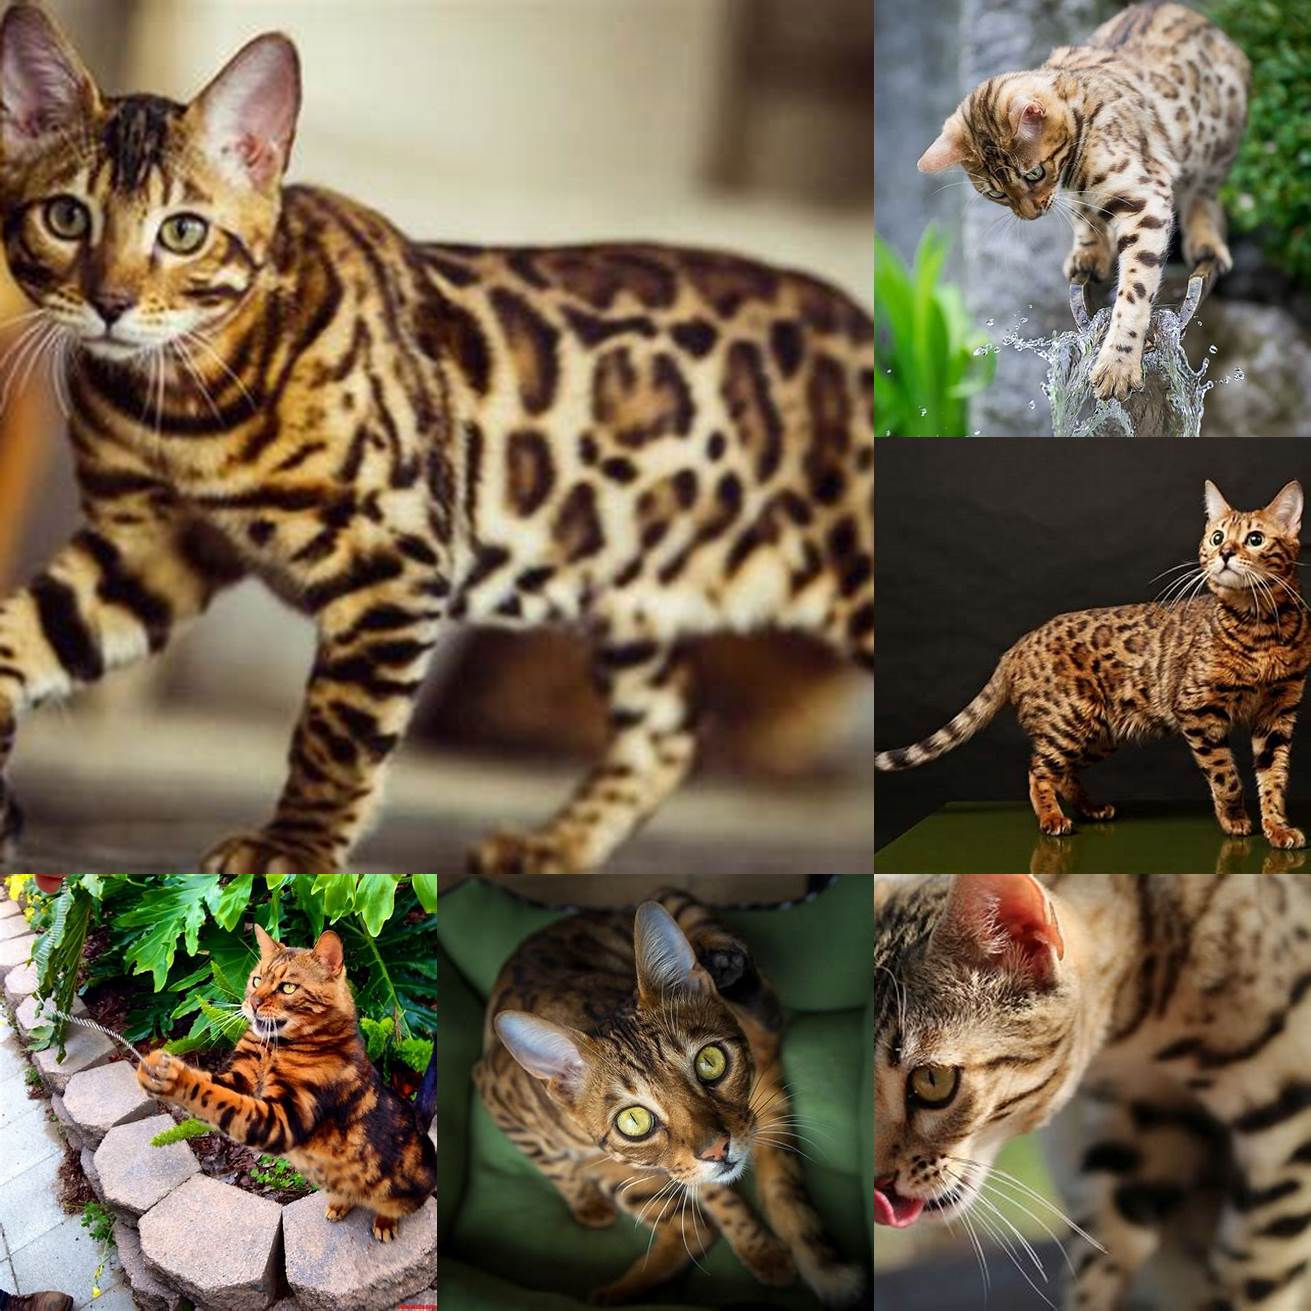 Bengal cats are very active and love to play